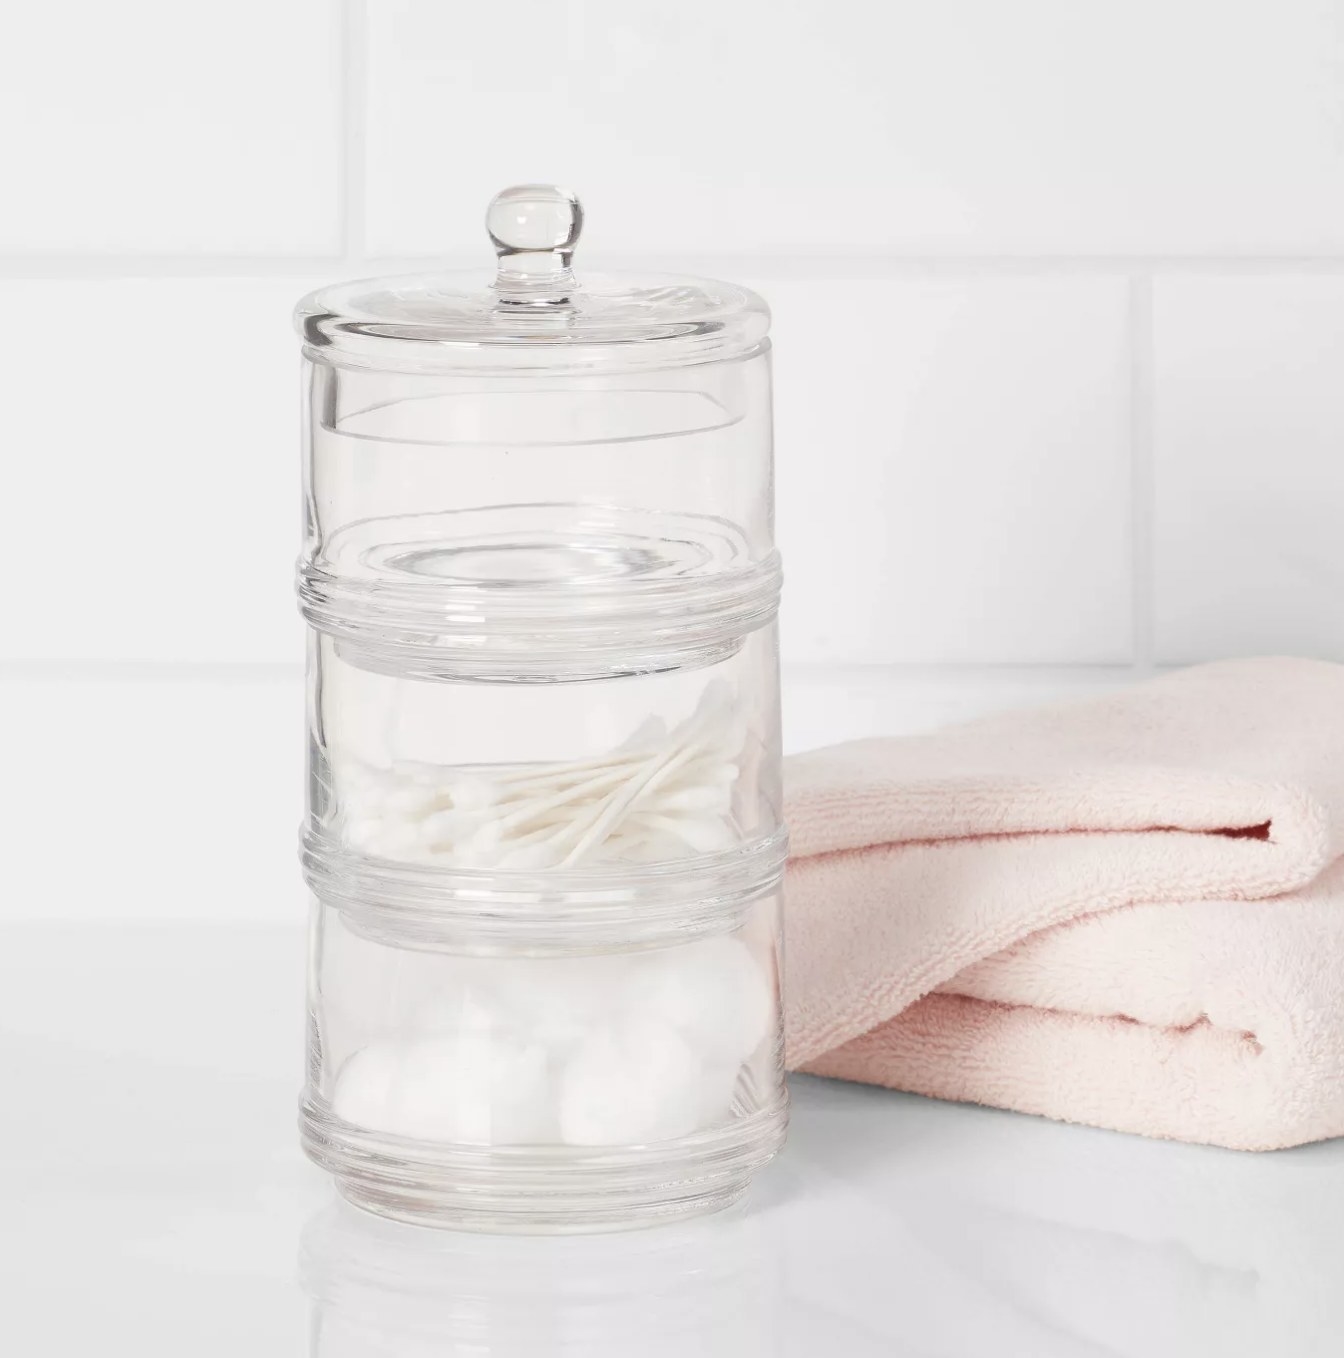 The canister with cotton swabs and cotton balls placed on countertop 